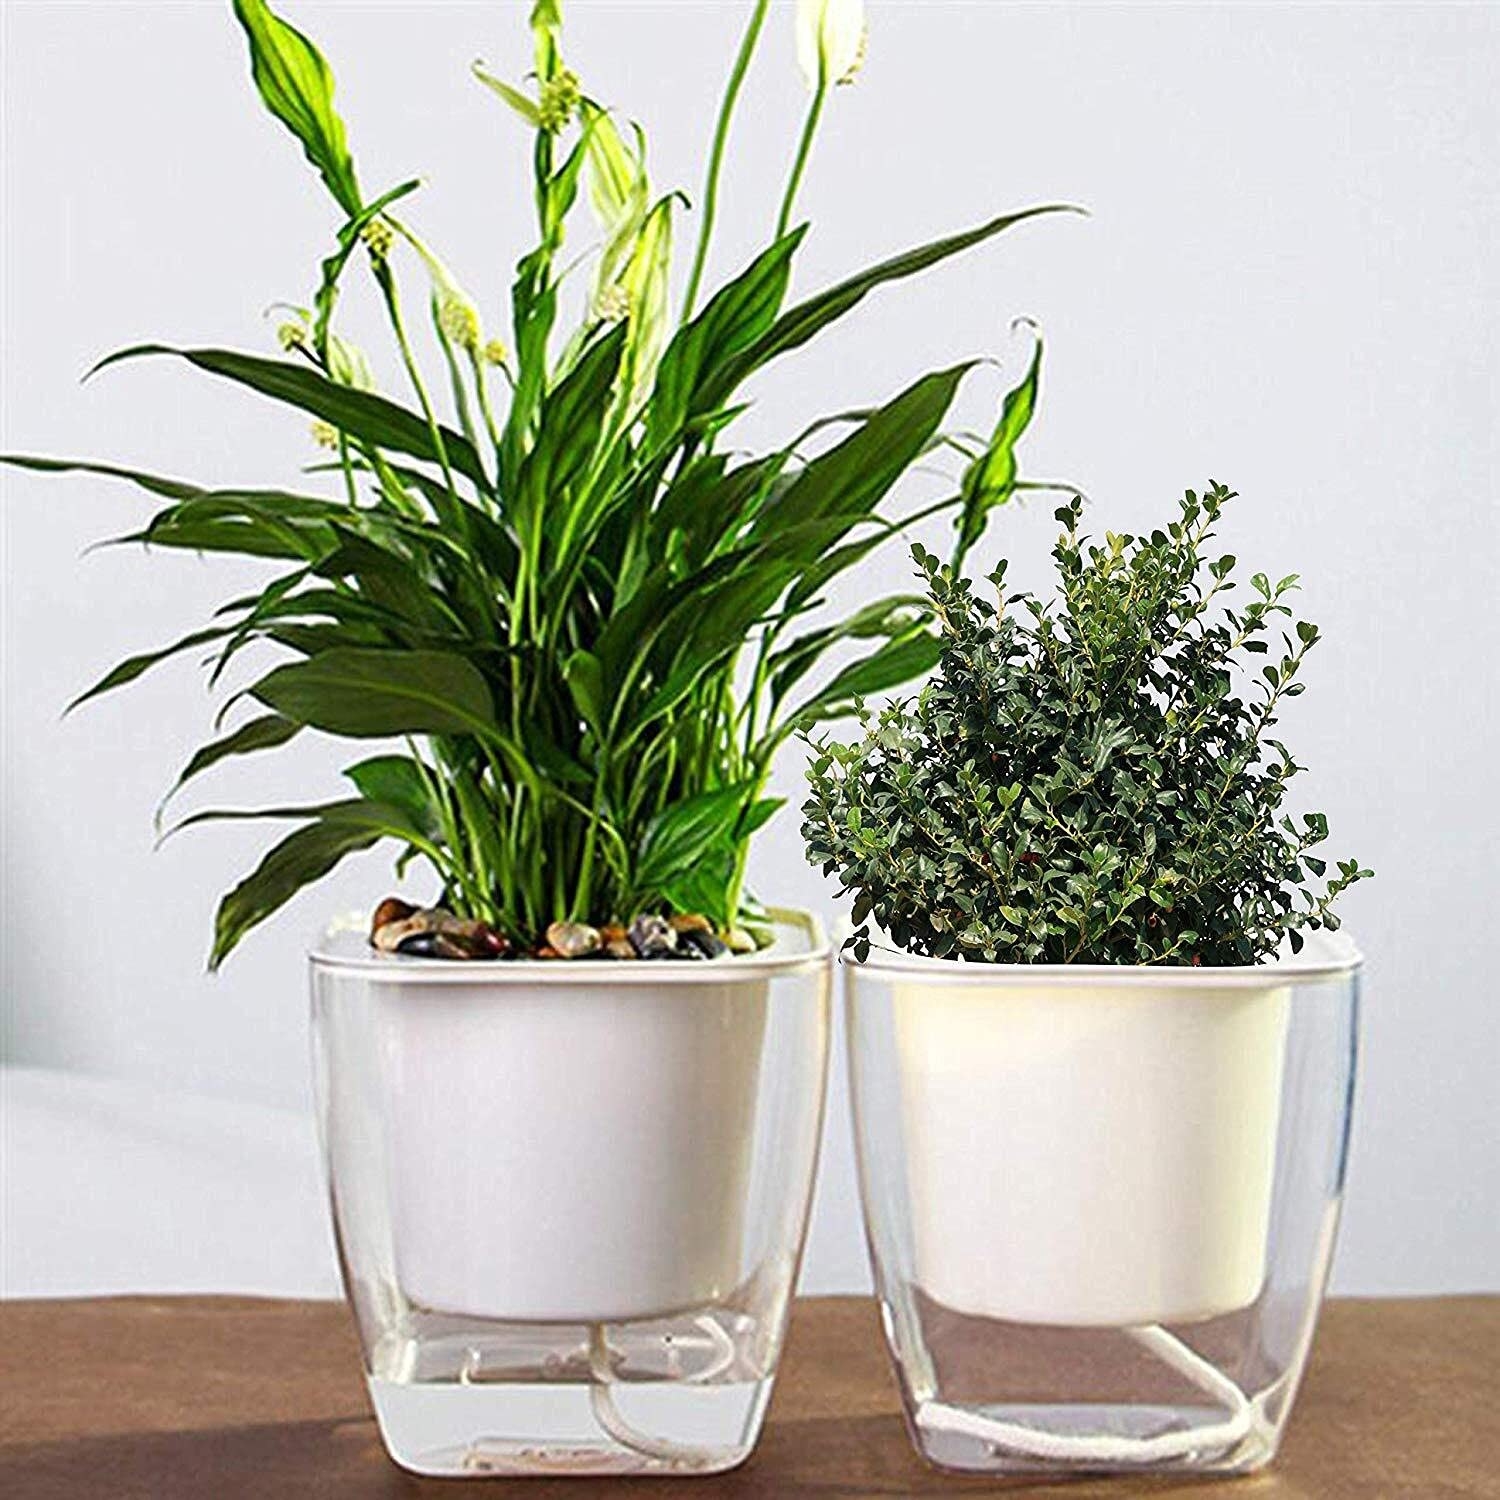 A pair of self water flower pots with plants in them